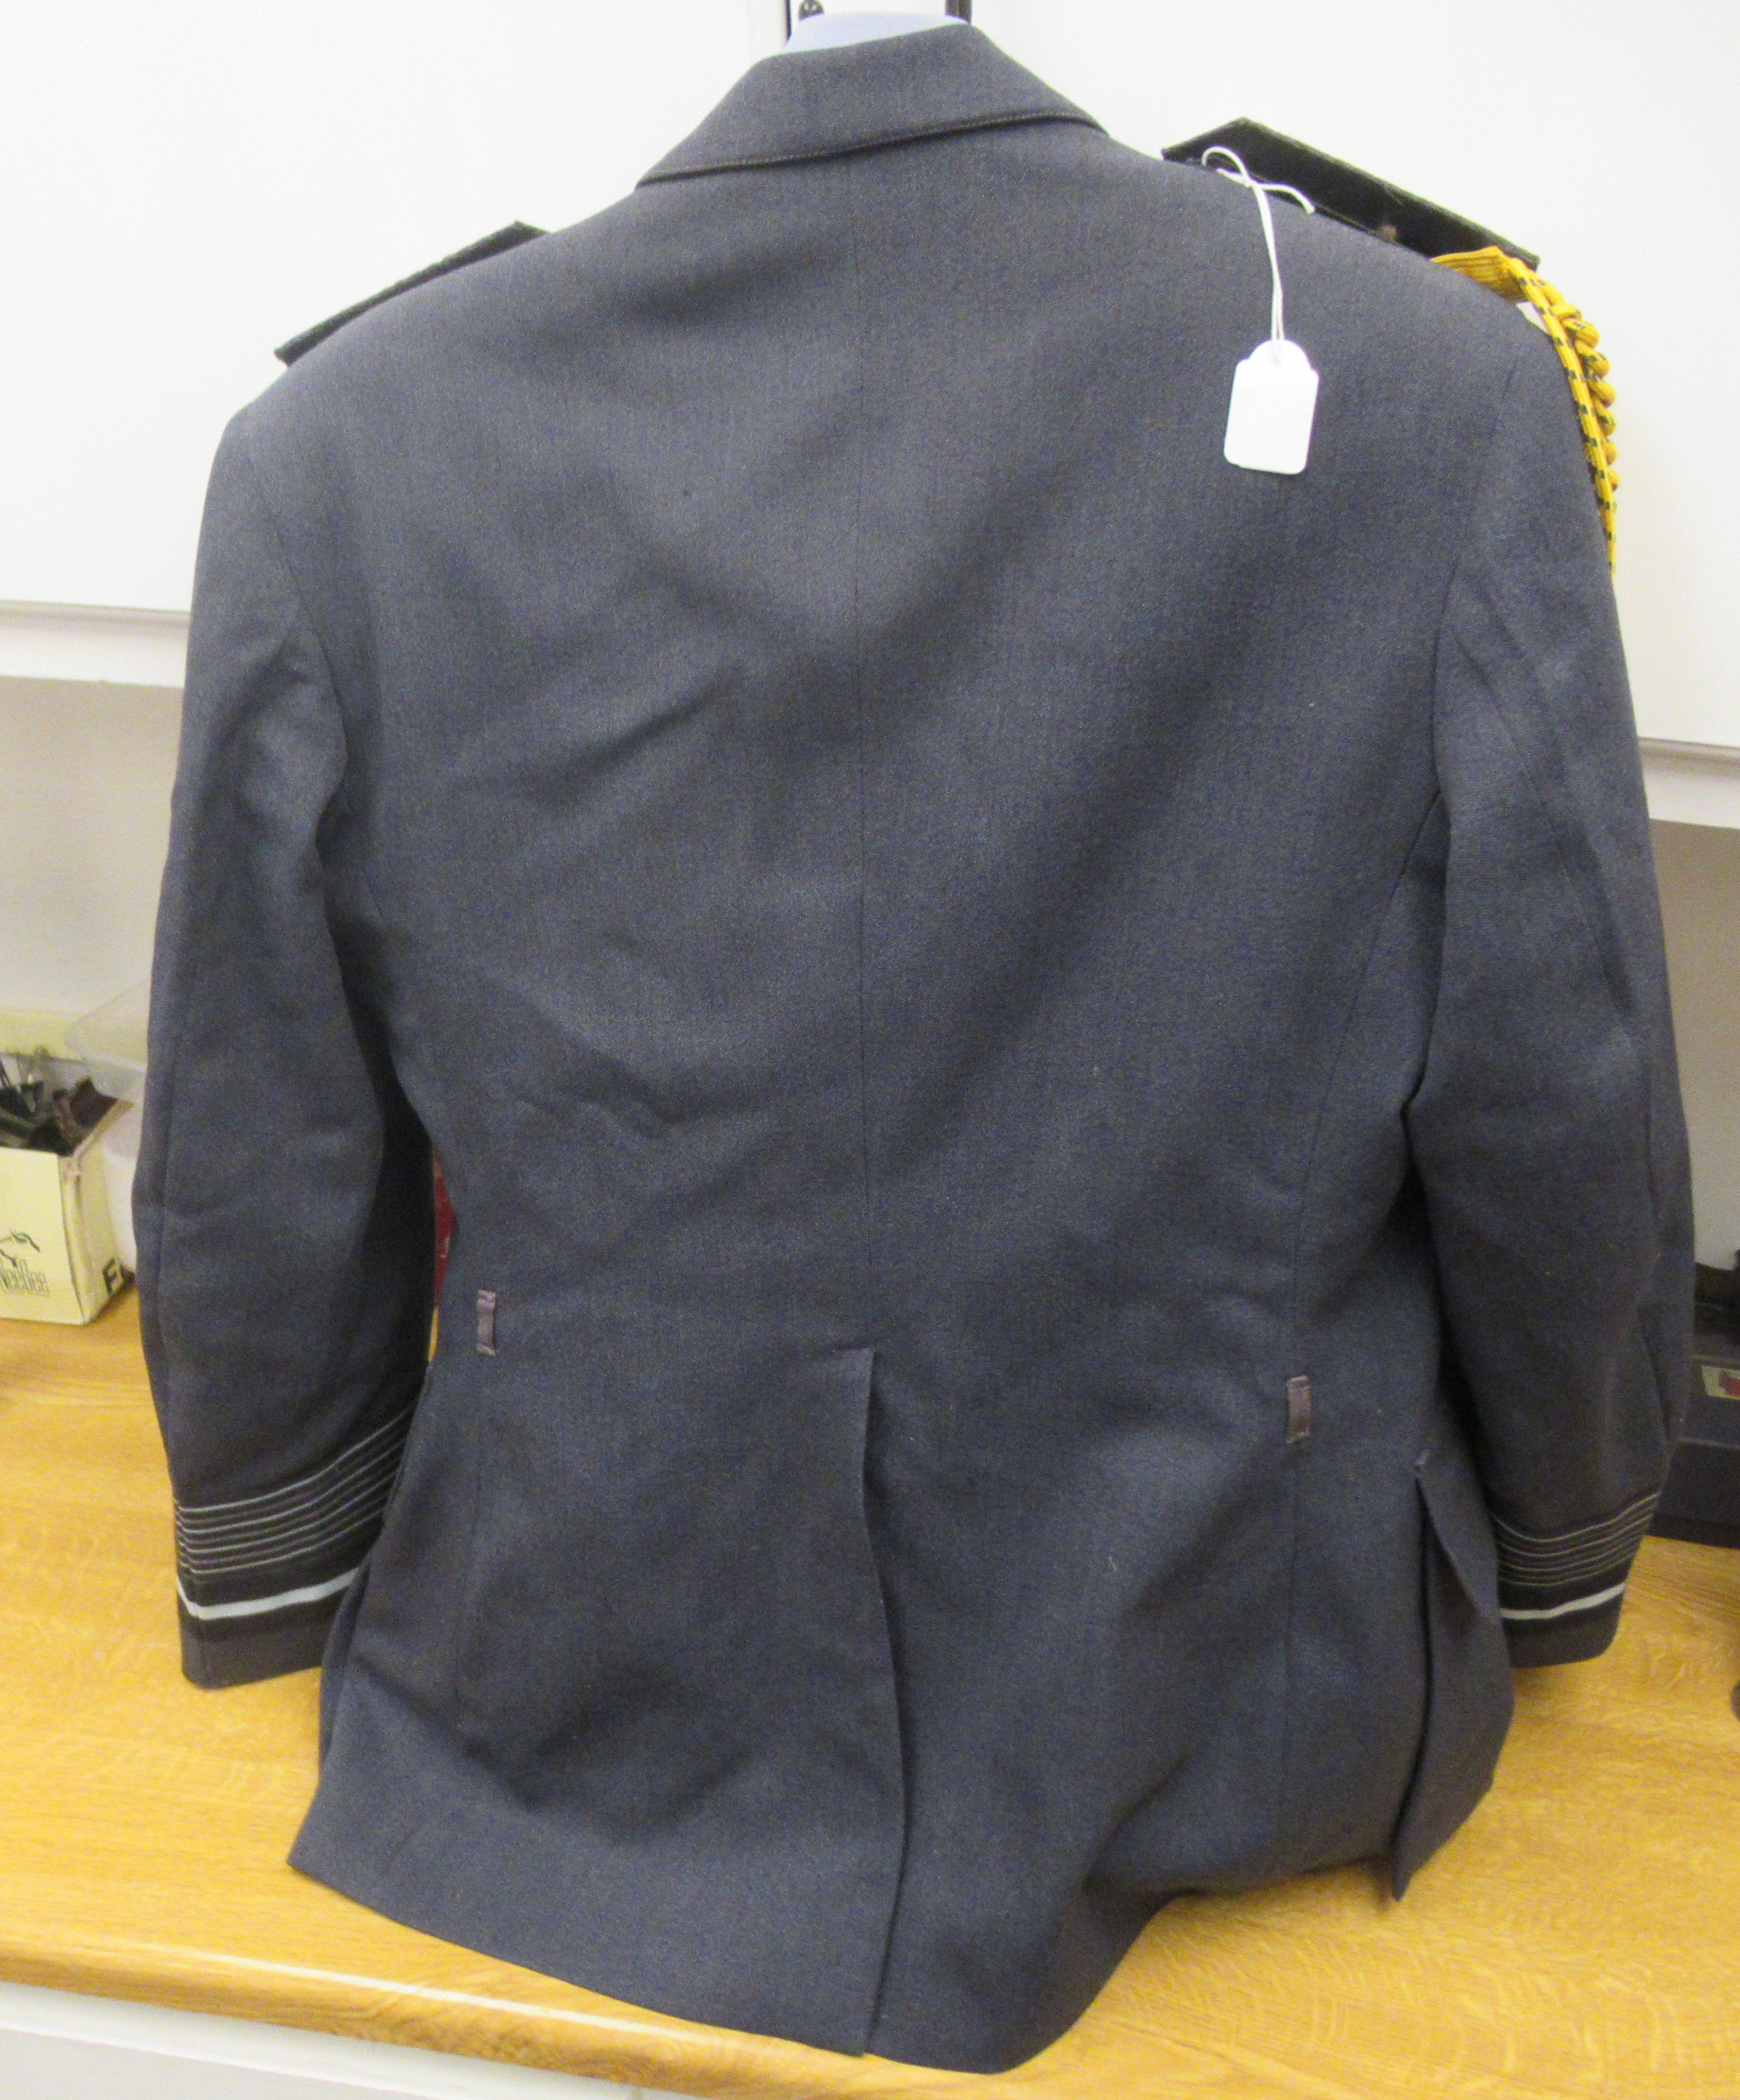 An RAF Senior Officer's uniform, comprising a tunic with medal ribbons and braided epaulettes, a - Image 7 of 12